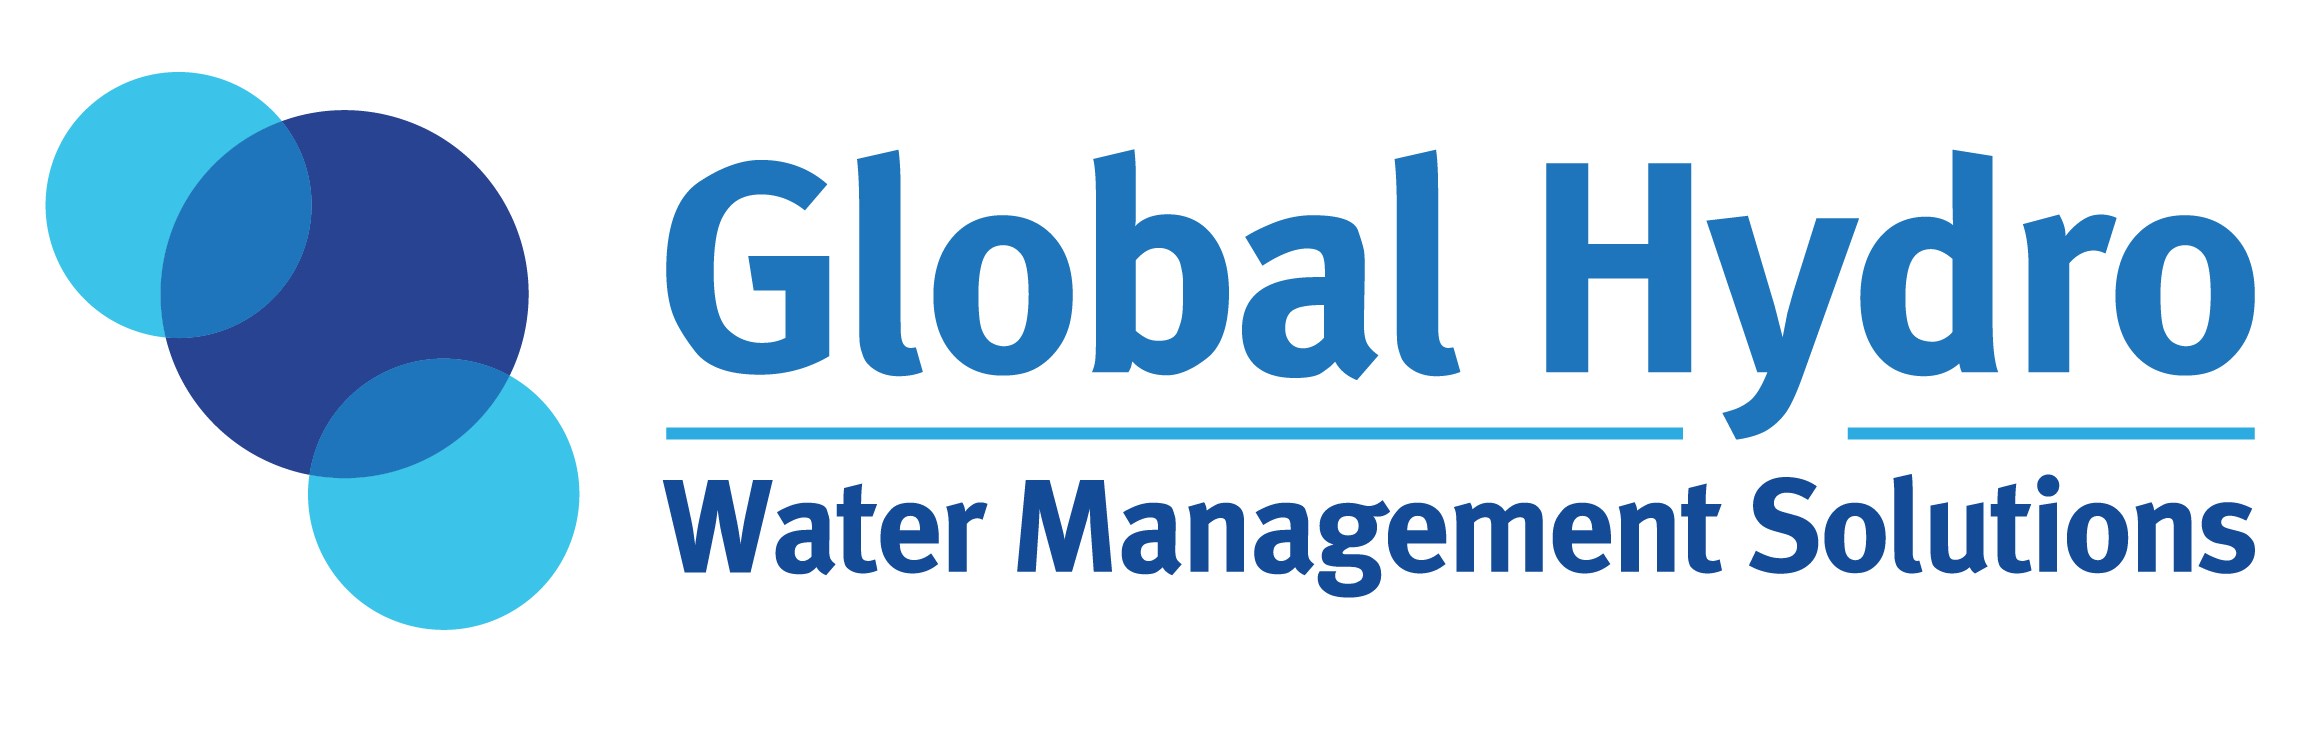 Ashley Price, Global Hydro Water Management Solutions - Managing Consultant/Director